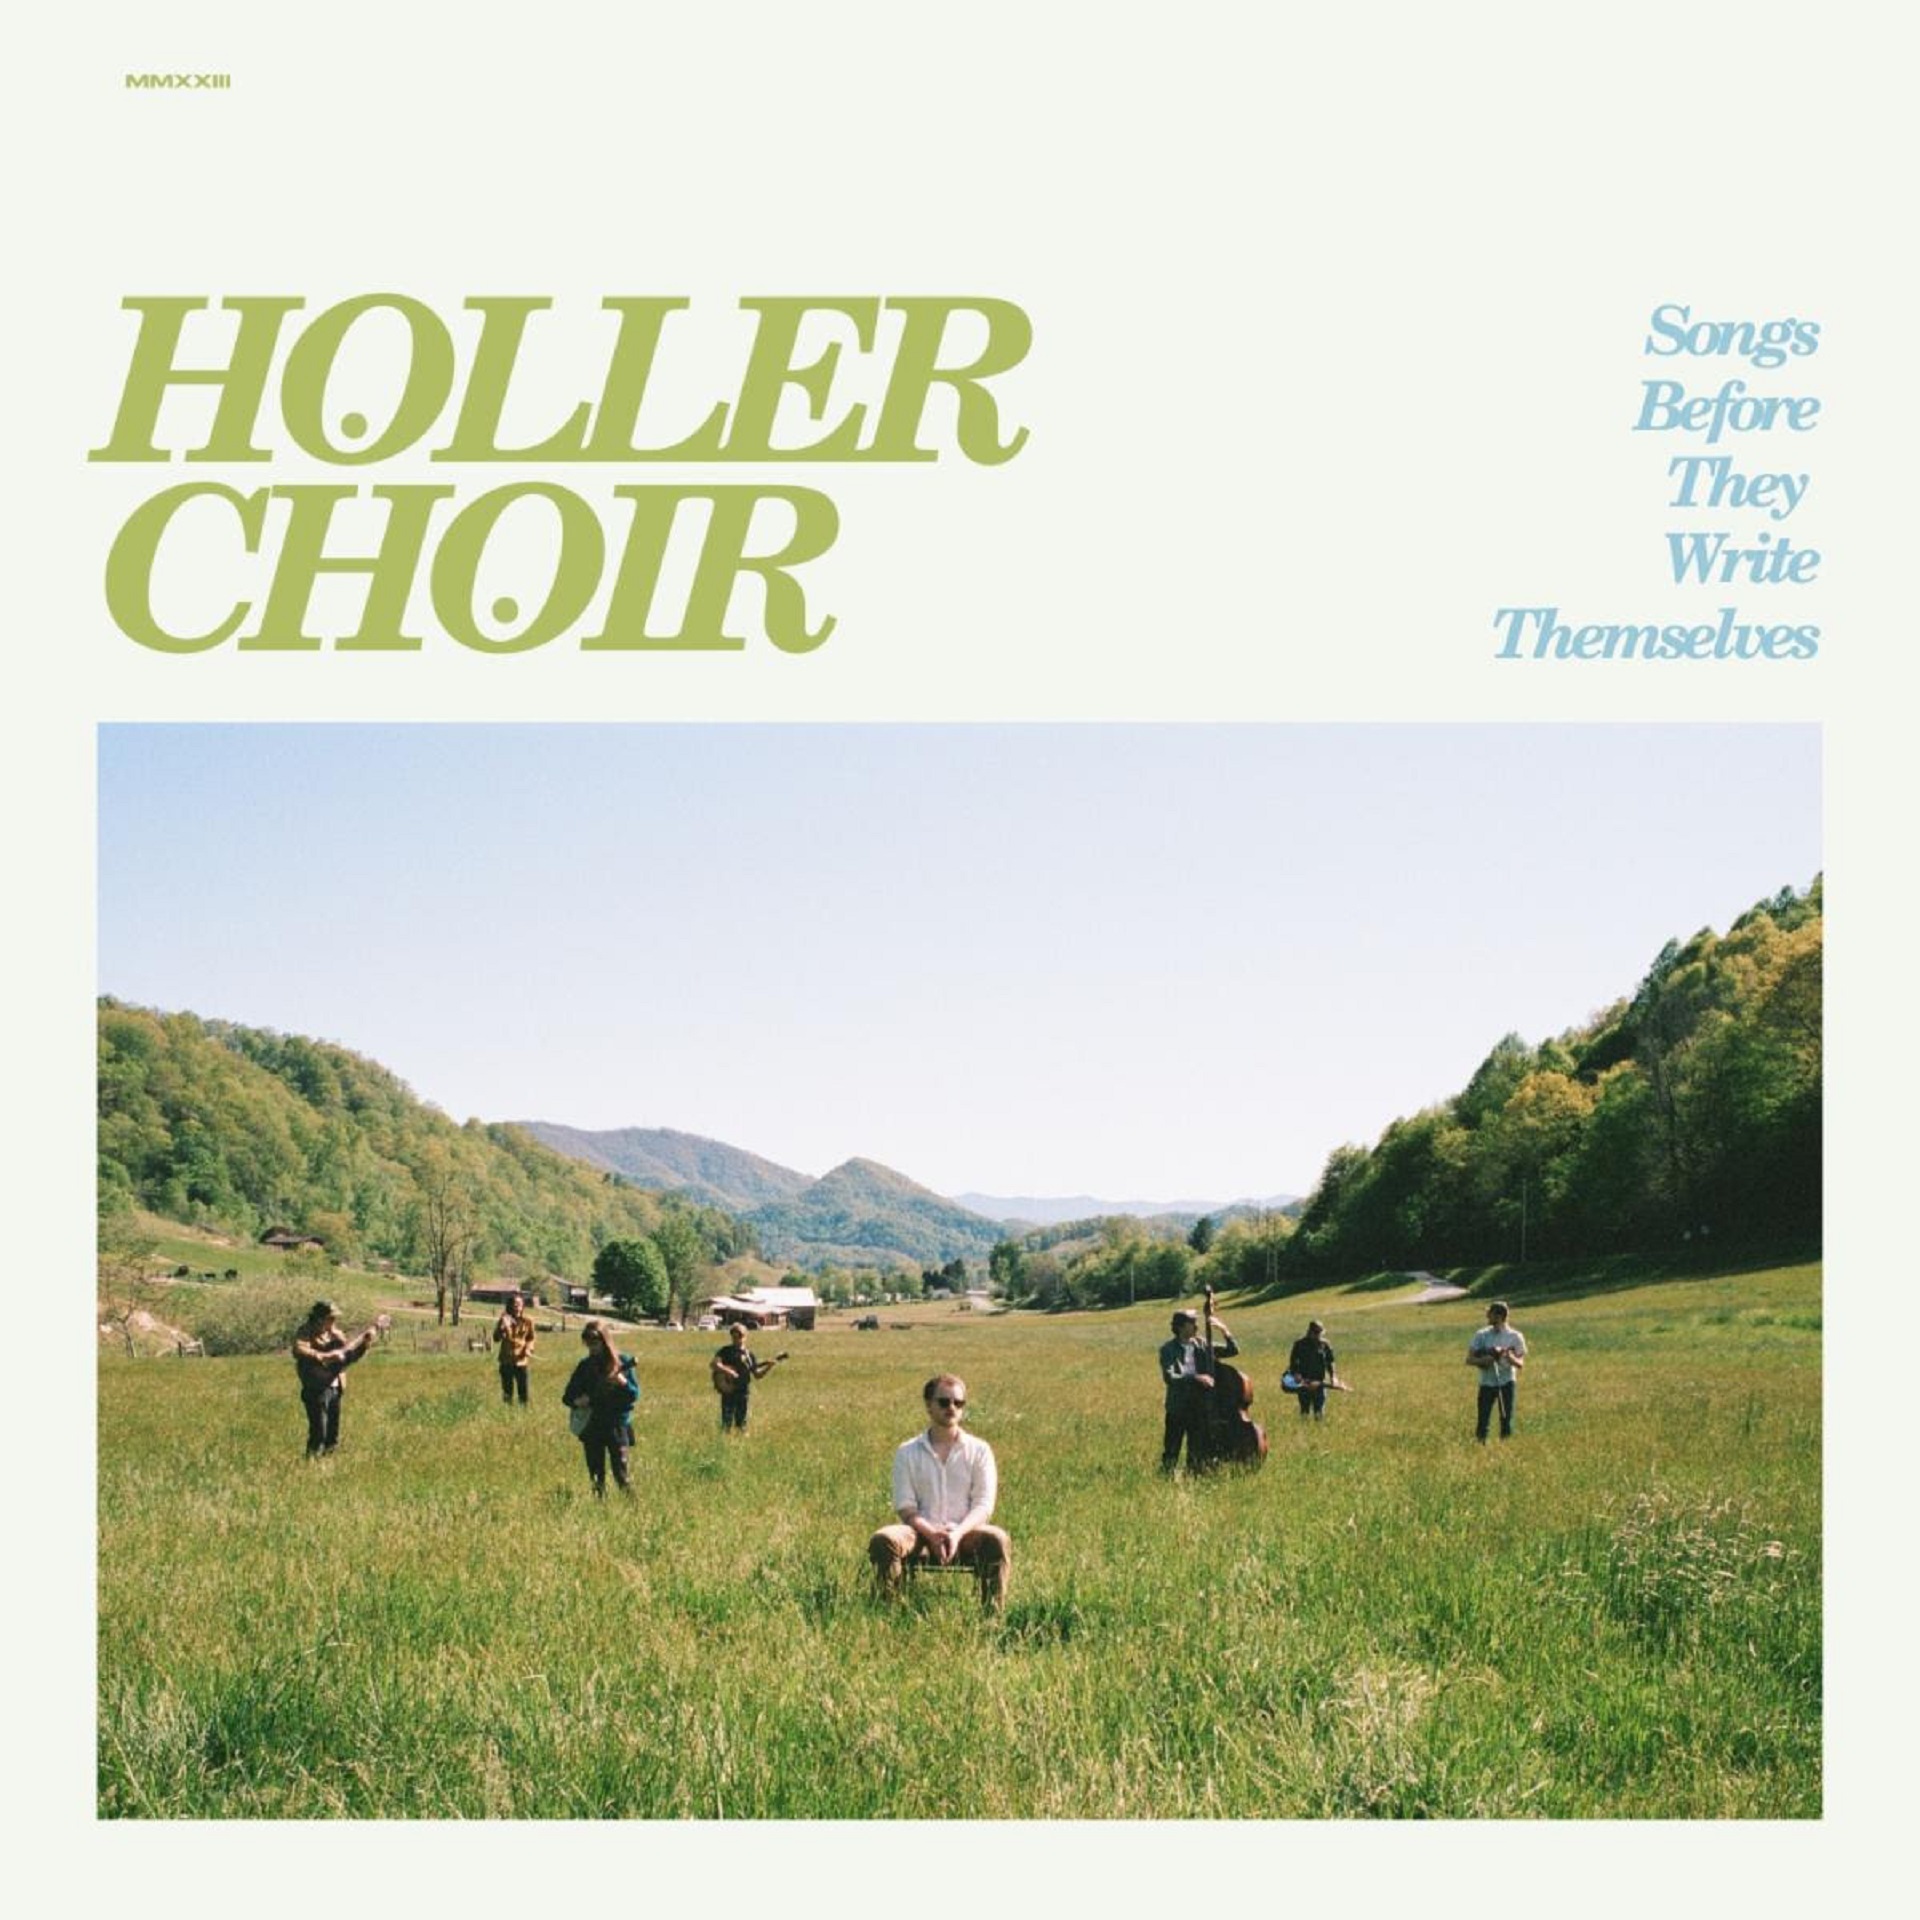 HOLLER CHOIR Announces Debut Album, SONGS BEFORE THEY WRITE THEMSELVES